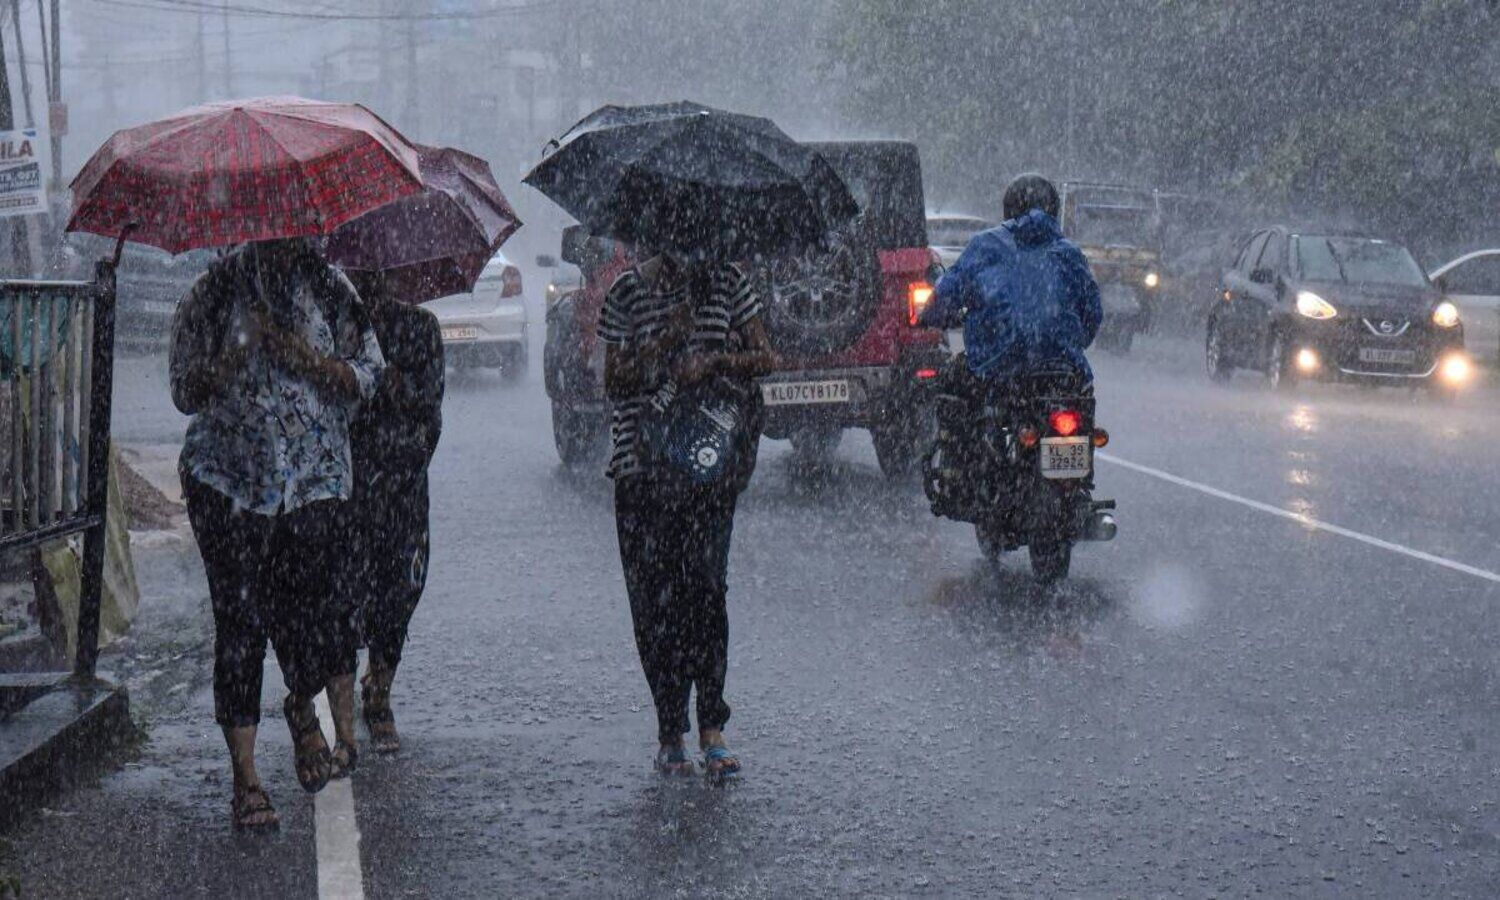 Weather Today: Heavy rain warning in many states today, clouds will rain heavily in UP too